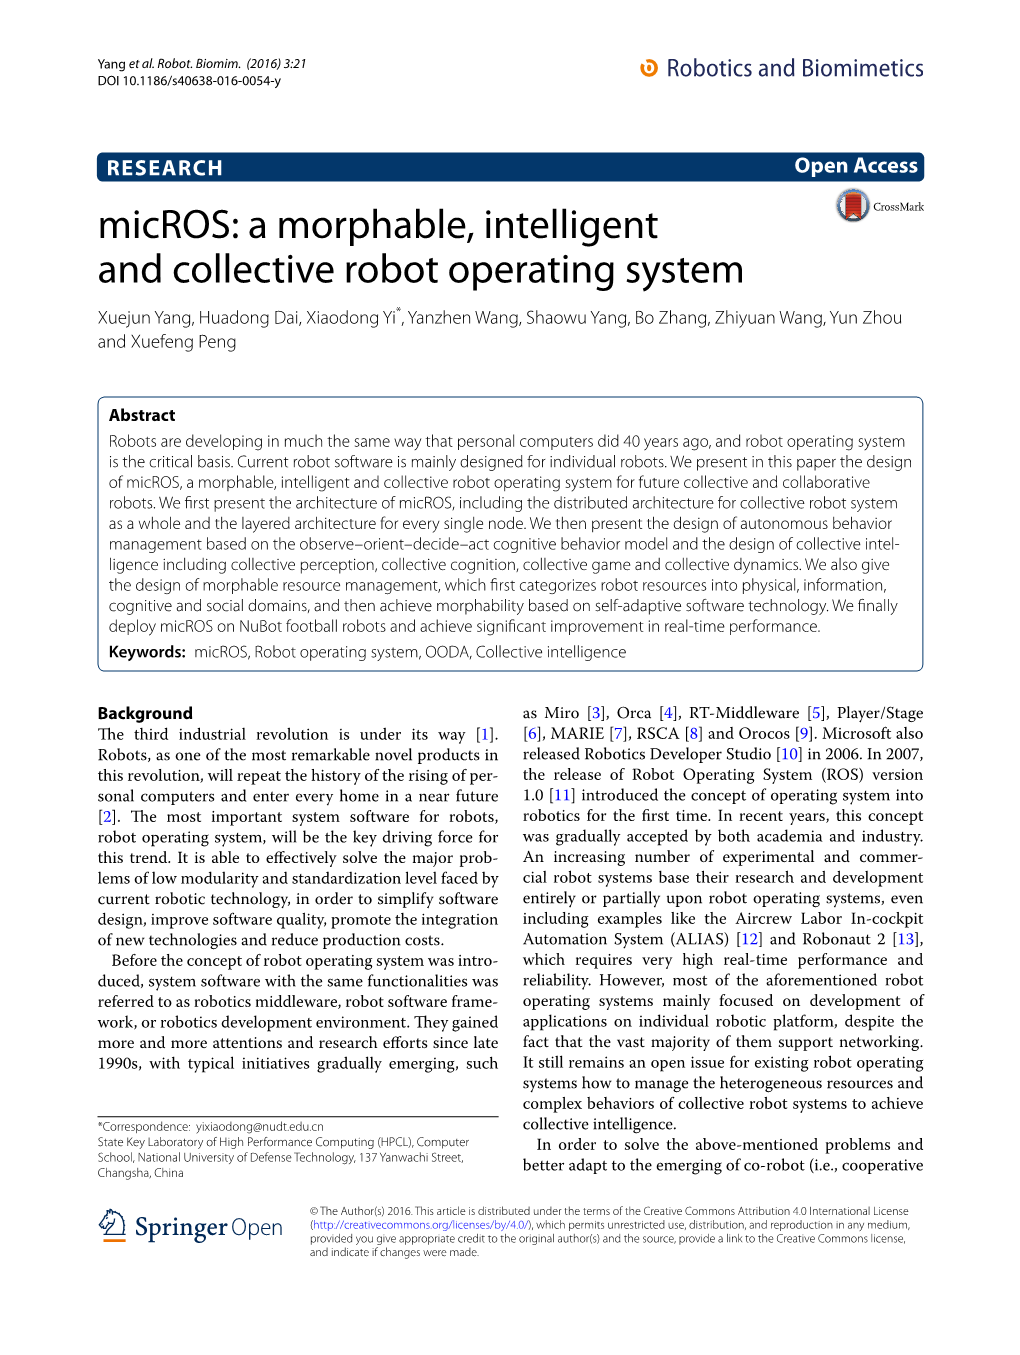 Micros: a Morphable, Intelligent and Collective Robot Operating System